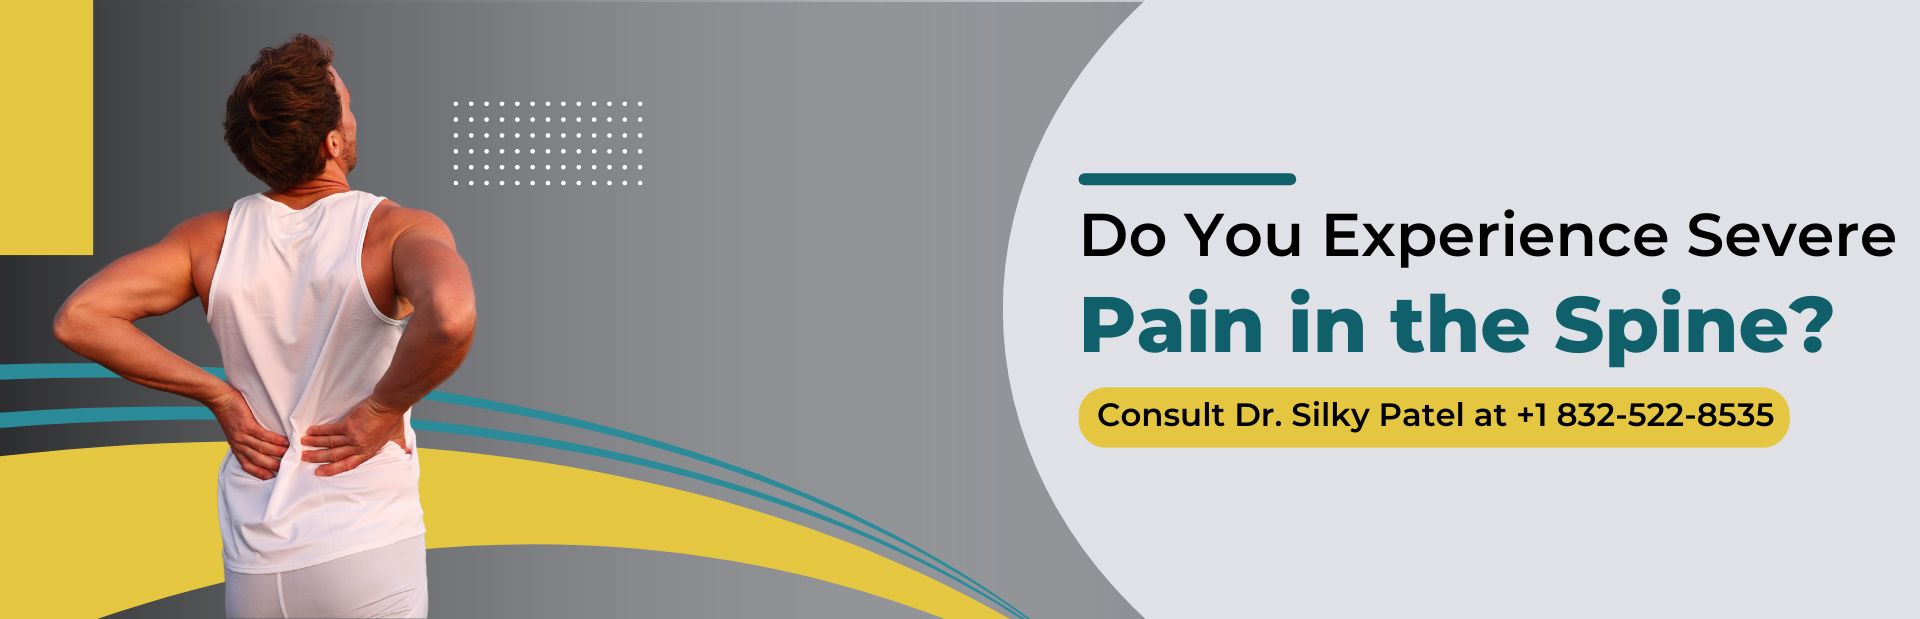 Severe Pain in the Spine - Silky Patel MD